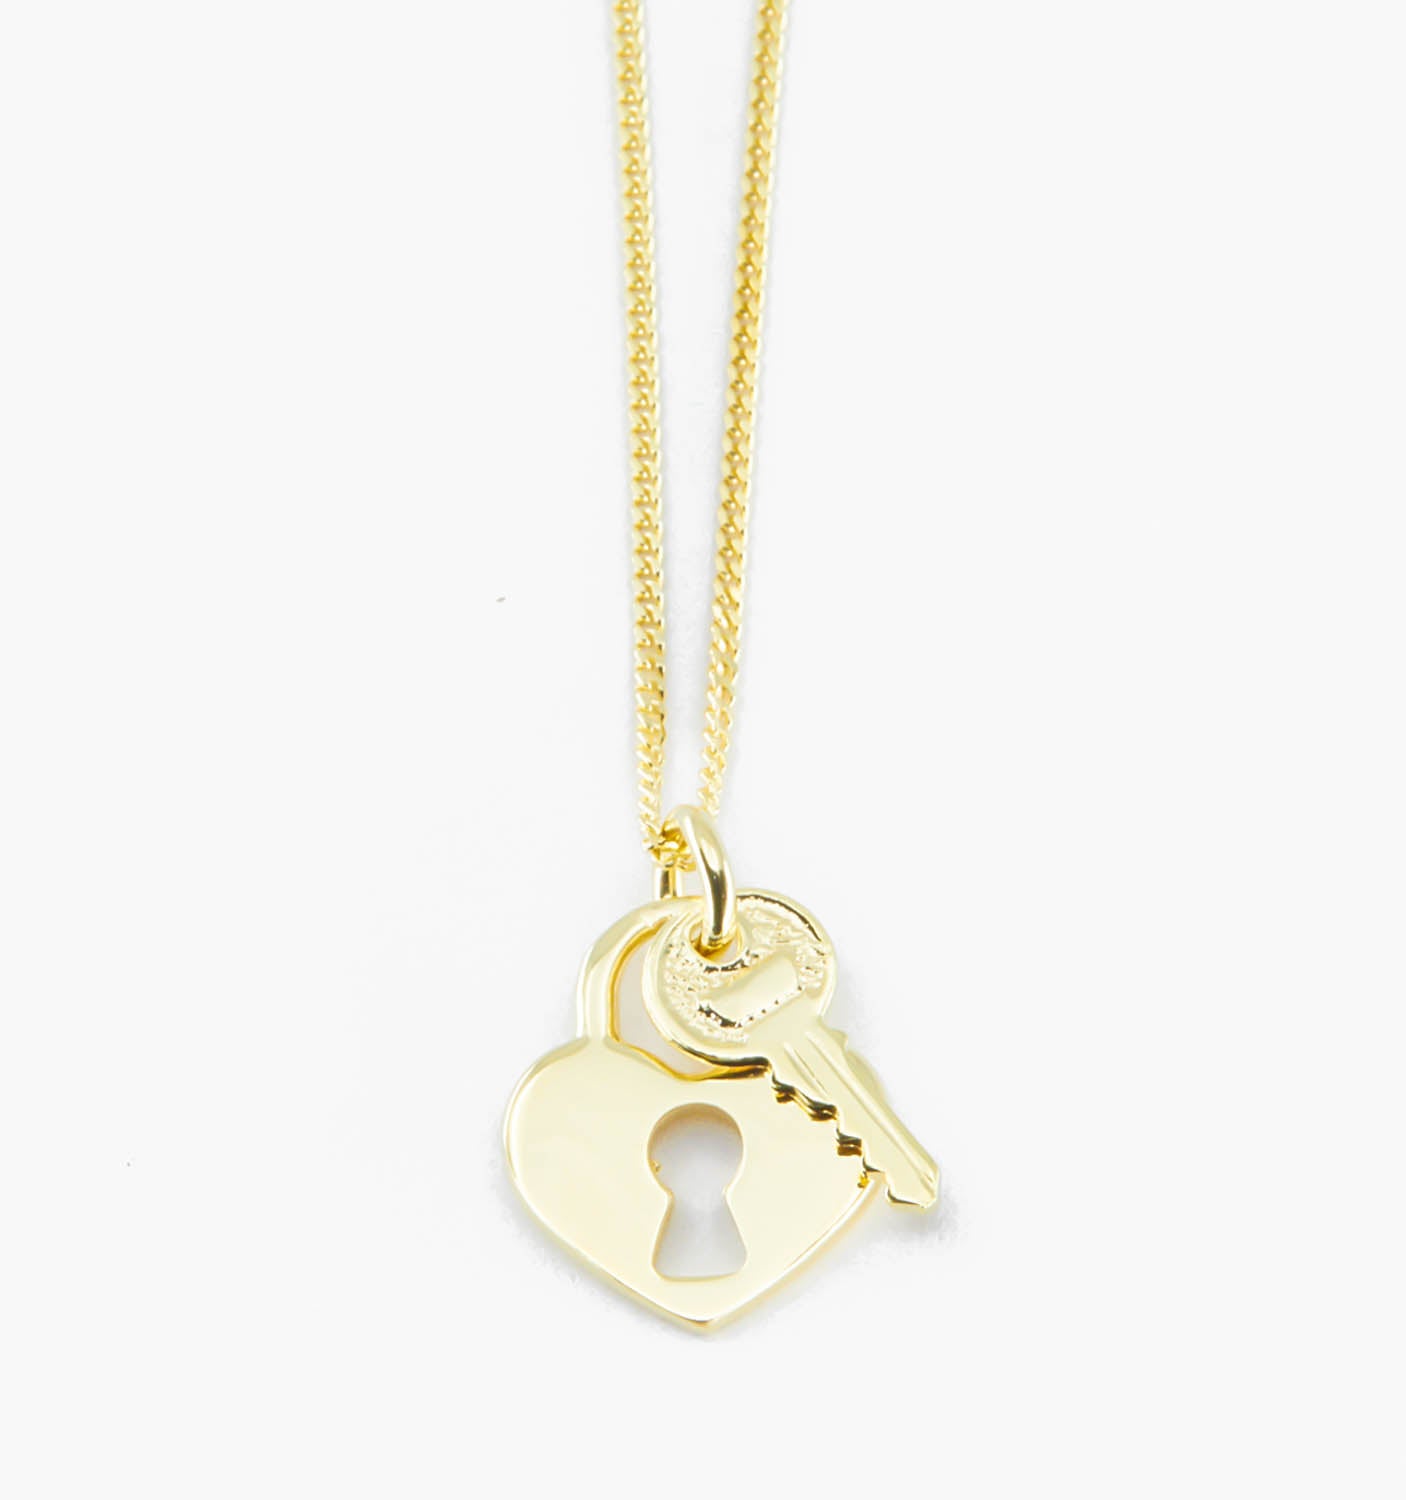 Eternity Gold Heart Lock-and-Key Pendant Necklace in 14K Two-Tone Gold, 18